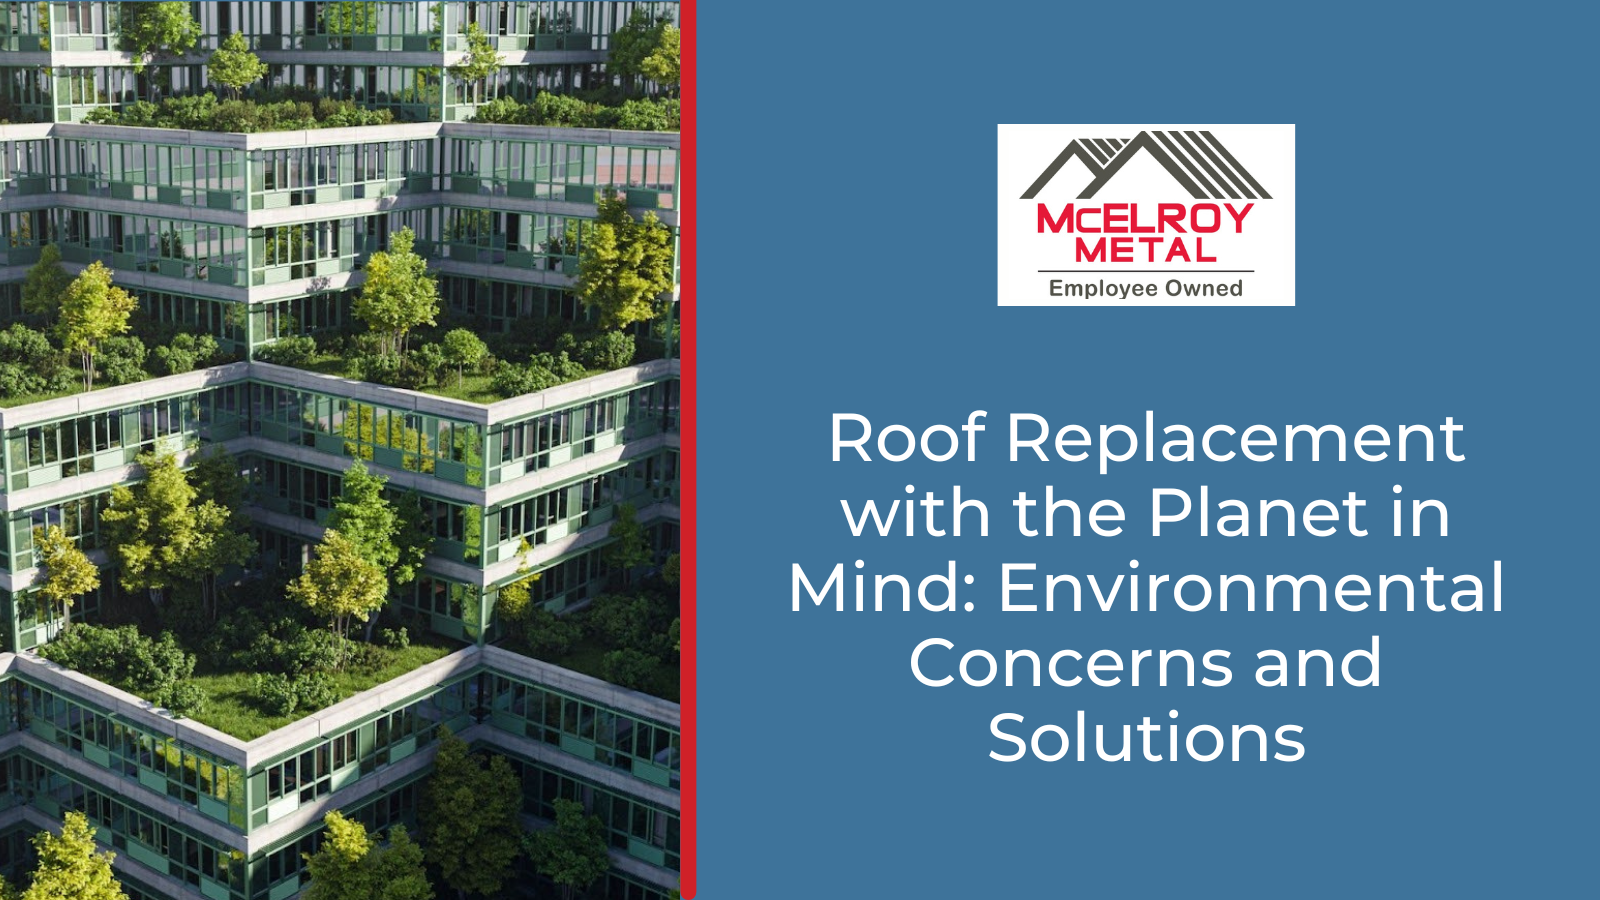 Roof Replacement with the Planet in Mind: Environmental Concerns and Solutions